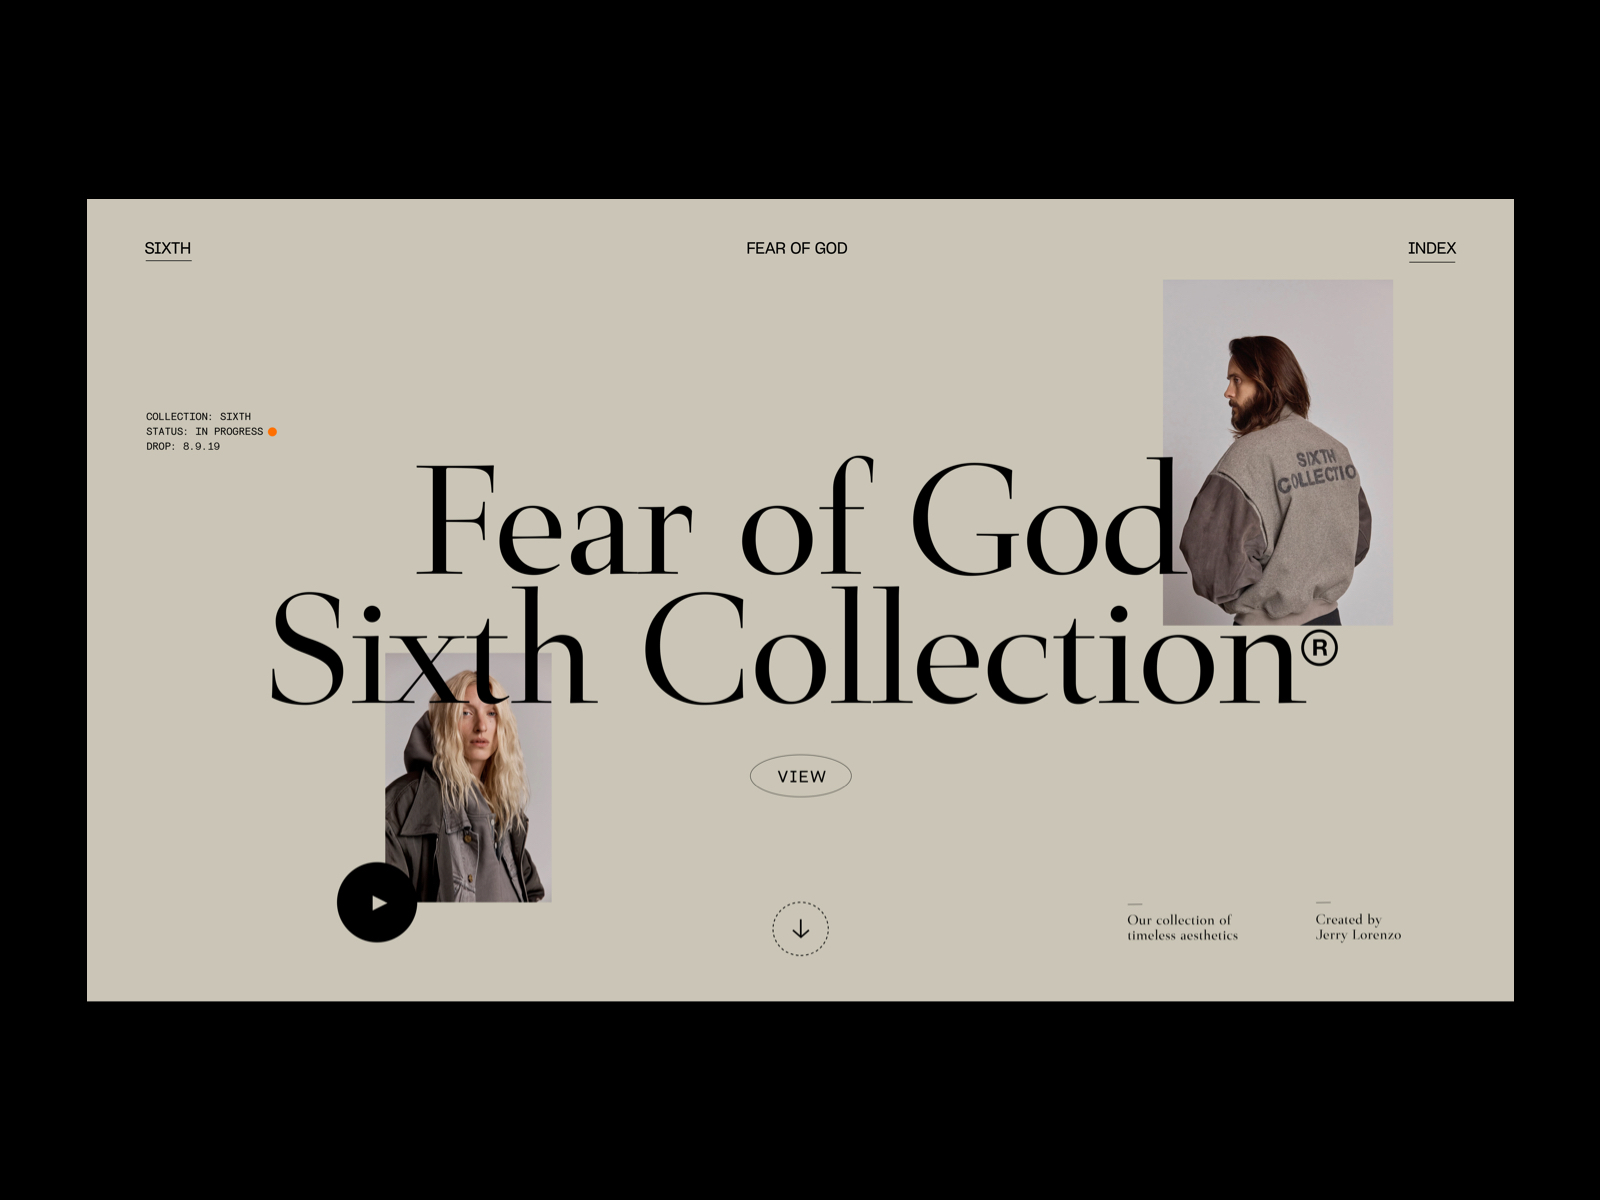 Fear of God - Sixth Collection by Nathan Bolger on Dribbble